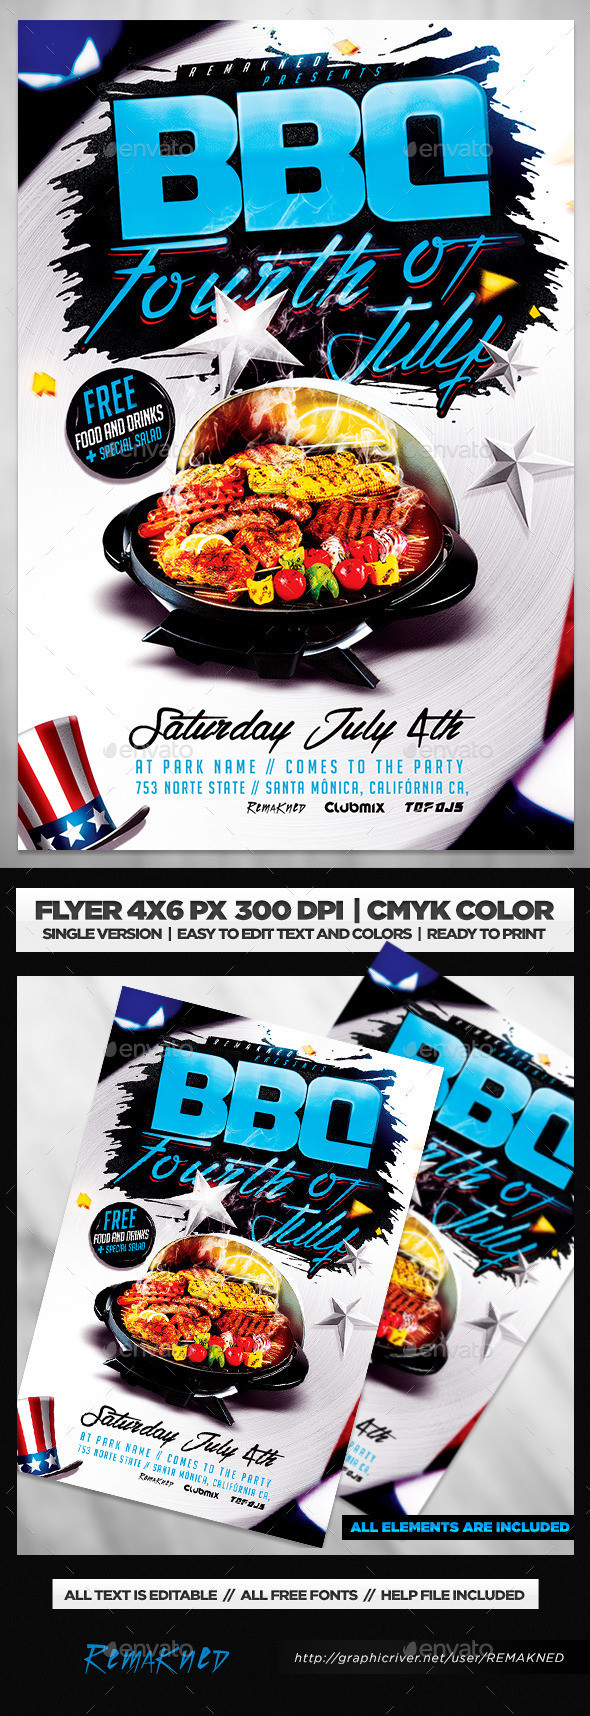 Bbq 204th 20july 20flyer 20template 20psd